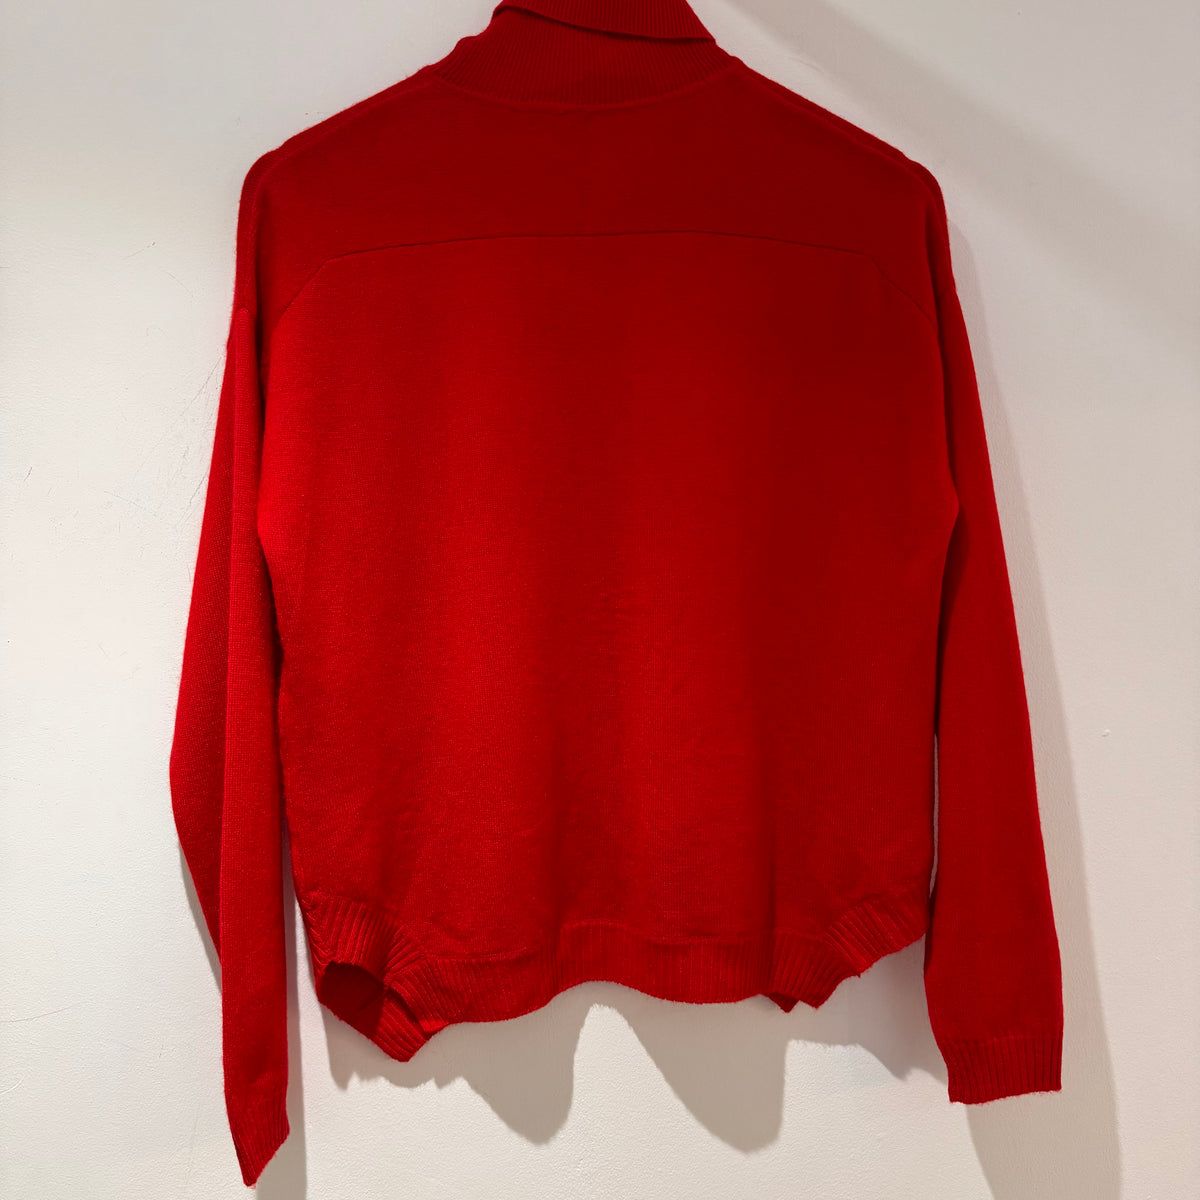 Ochre Turtle Neck Cashmere Sweater Red Size Small